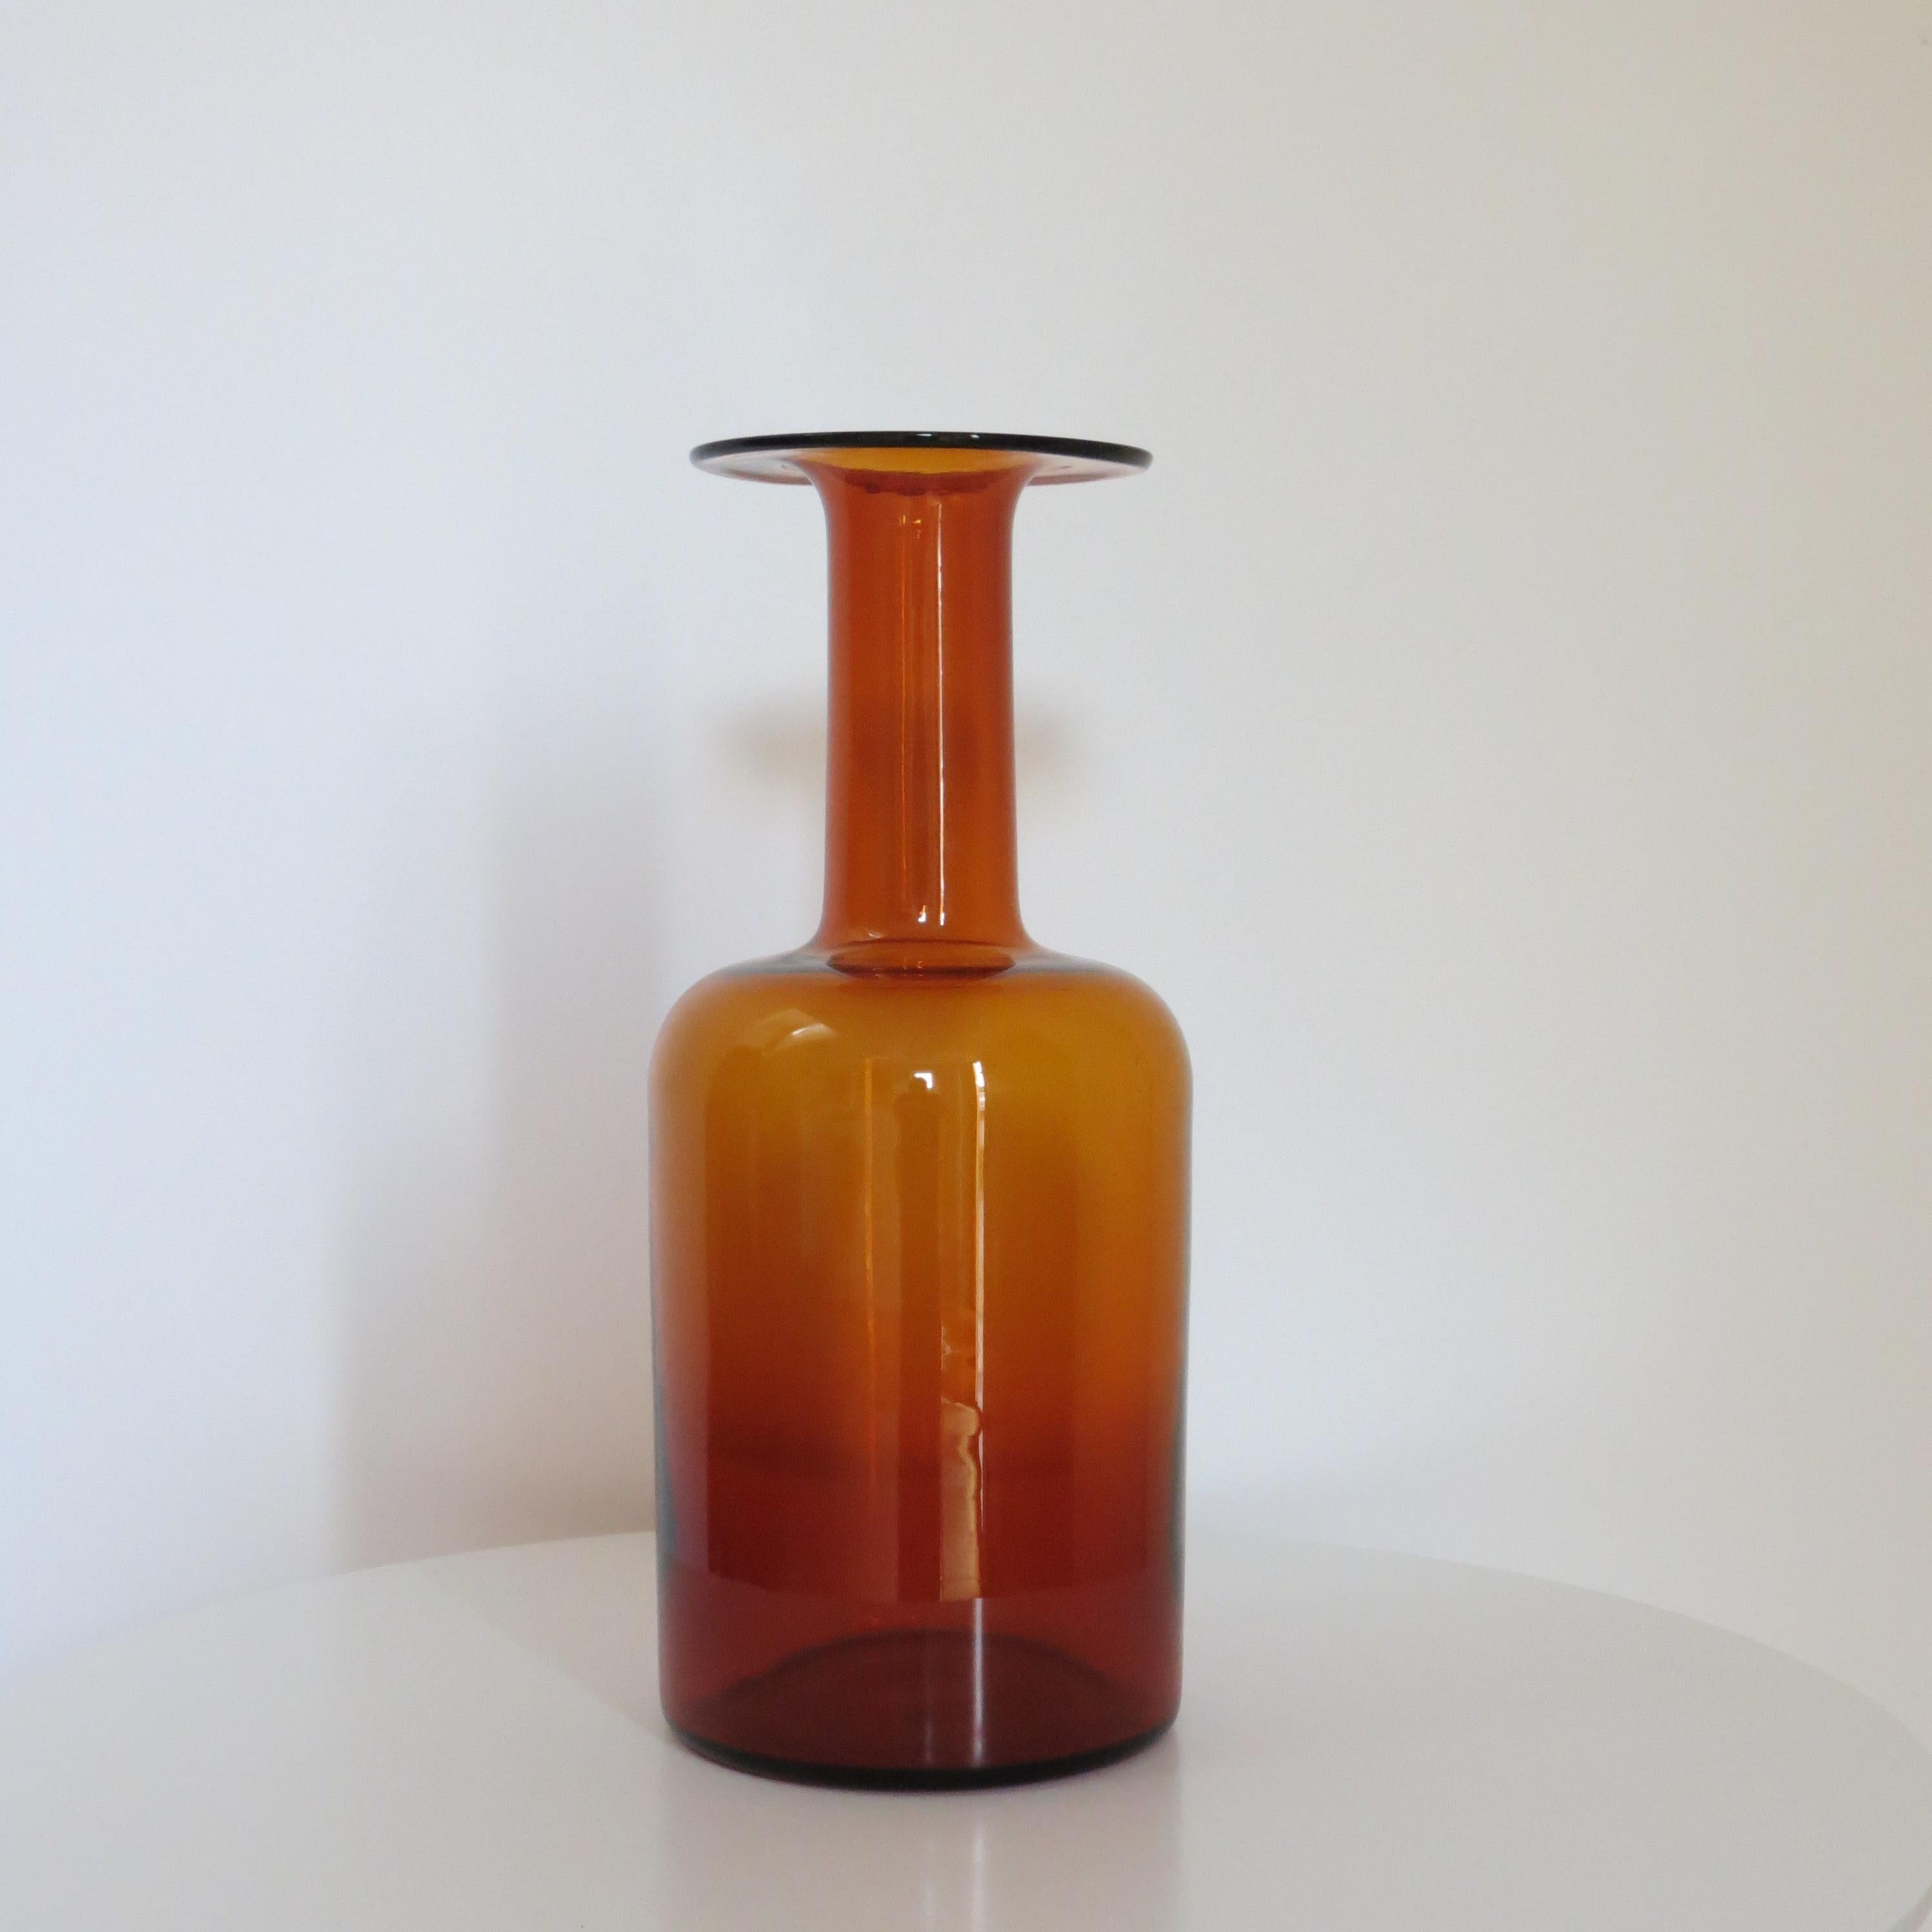 A very nice Gulvase by Otto Brauer for Holmegaard.

Hand blown glass, amber colour, medium size.

Good over all condition.

Please note shipping to US via the seller is £65.

ST1515